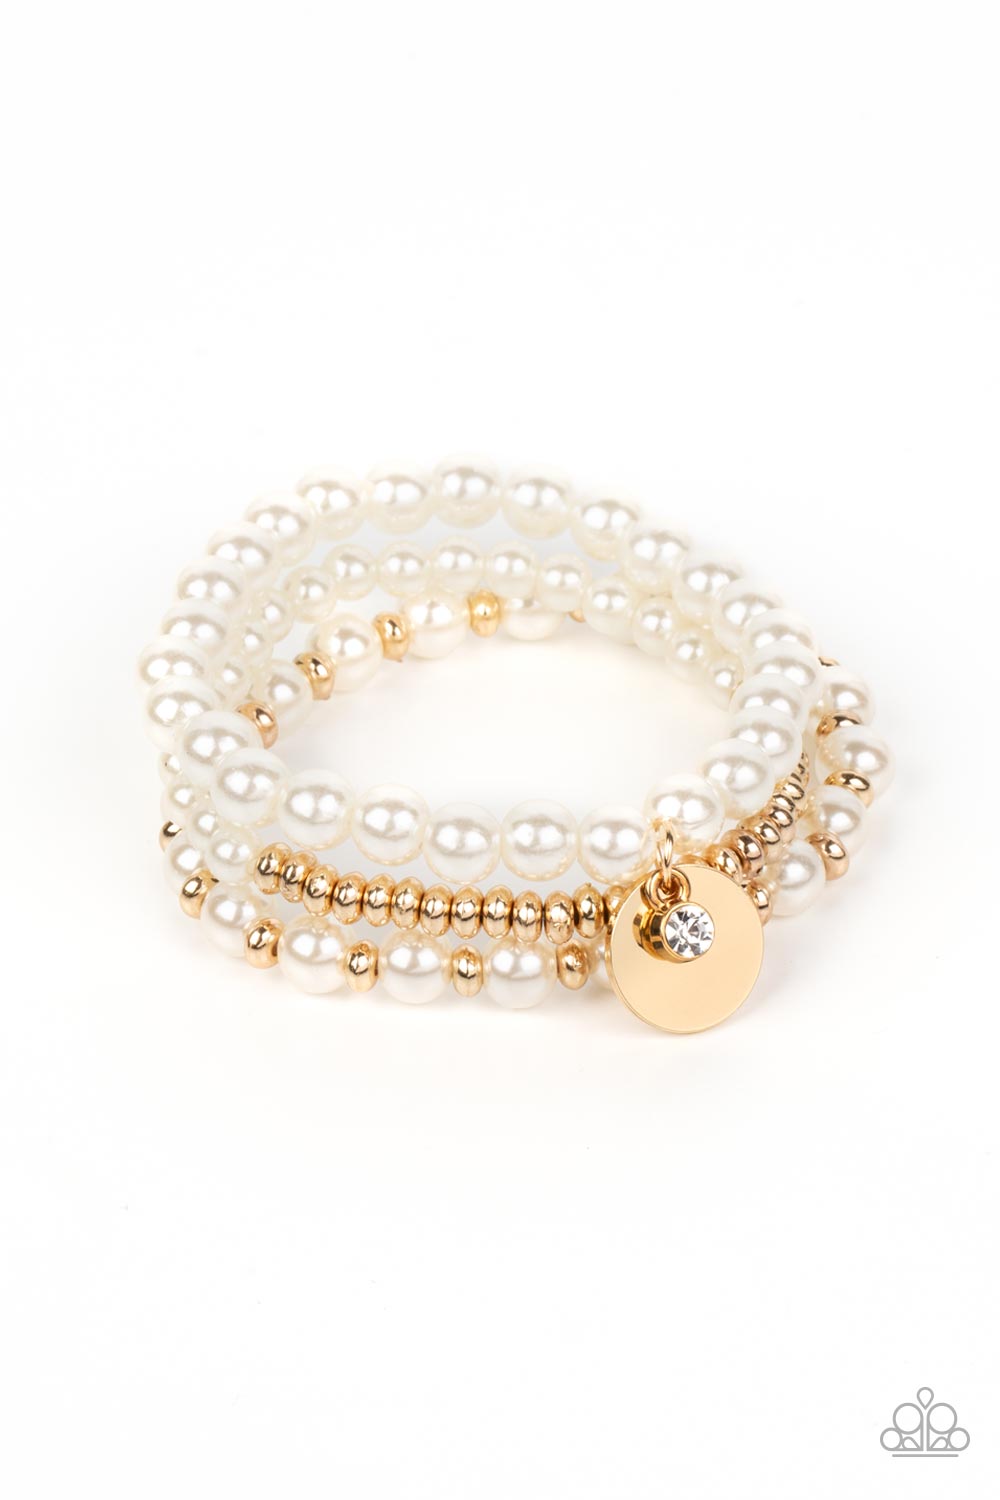 Pearly Professional Gold Bracelet - Paparazzi Accessories  Classic white pearls, glistening gold beads, and a white crystal rhinestone are threaded along elastic stretchy bands, creating refined layers across the wrist.  Sold as one set of three bracelets.  P9RE-GDXX-373XX